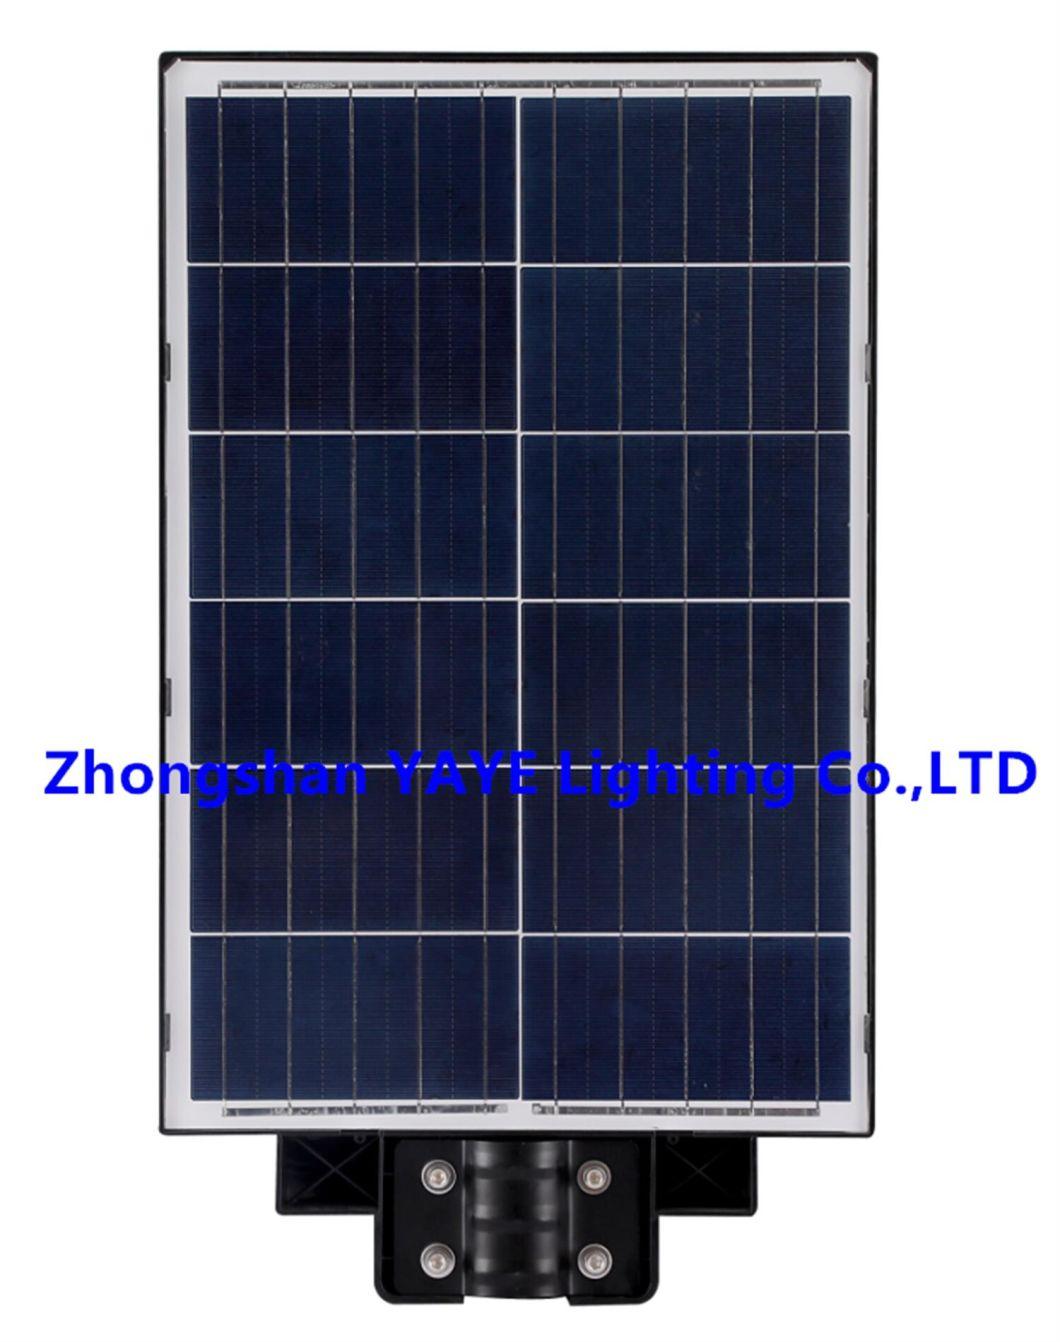 Yaye Hottest Sell 200W/300W/400W Integrated All in One Solar LED Street Light with Stock 1000PCS/Remote Controller/Radar Sensor/ 2 Years Warranty